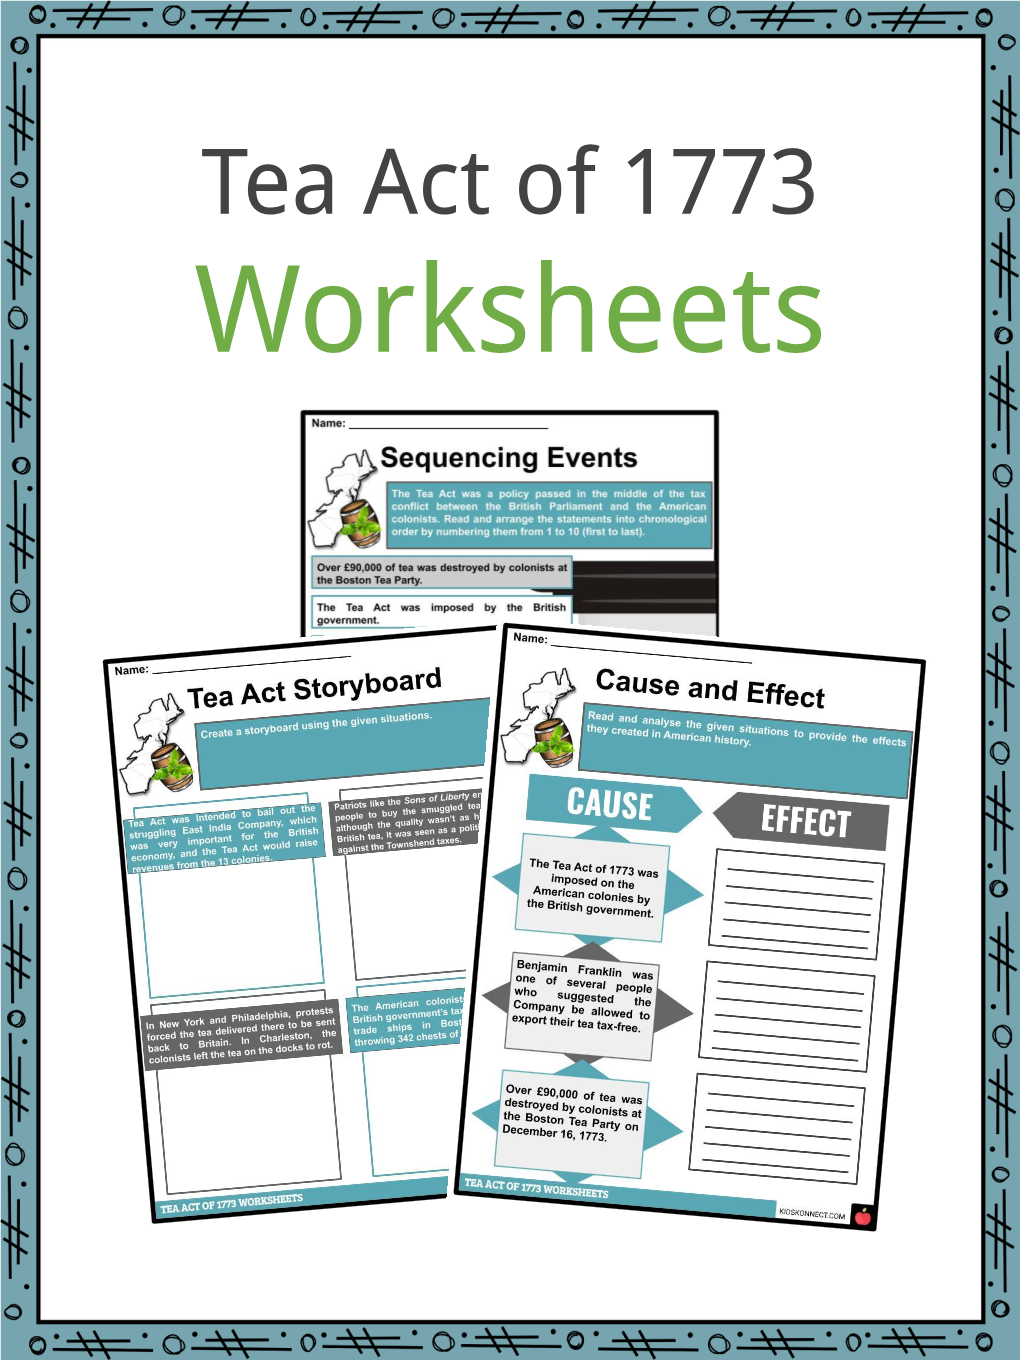 Tea Act of 1773 Worksheets Tea Act of 1773 Facts